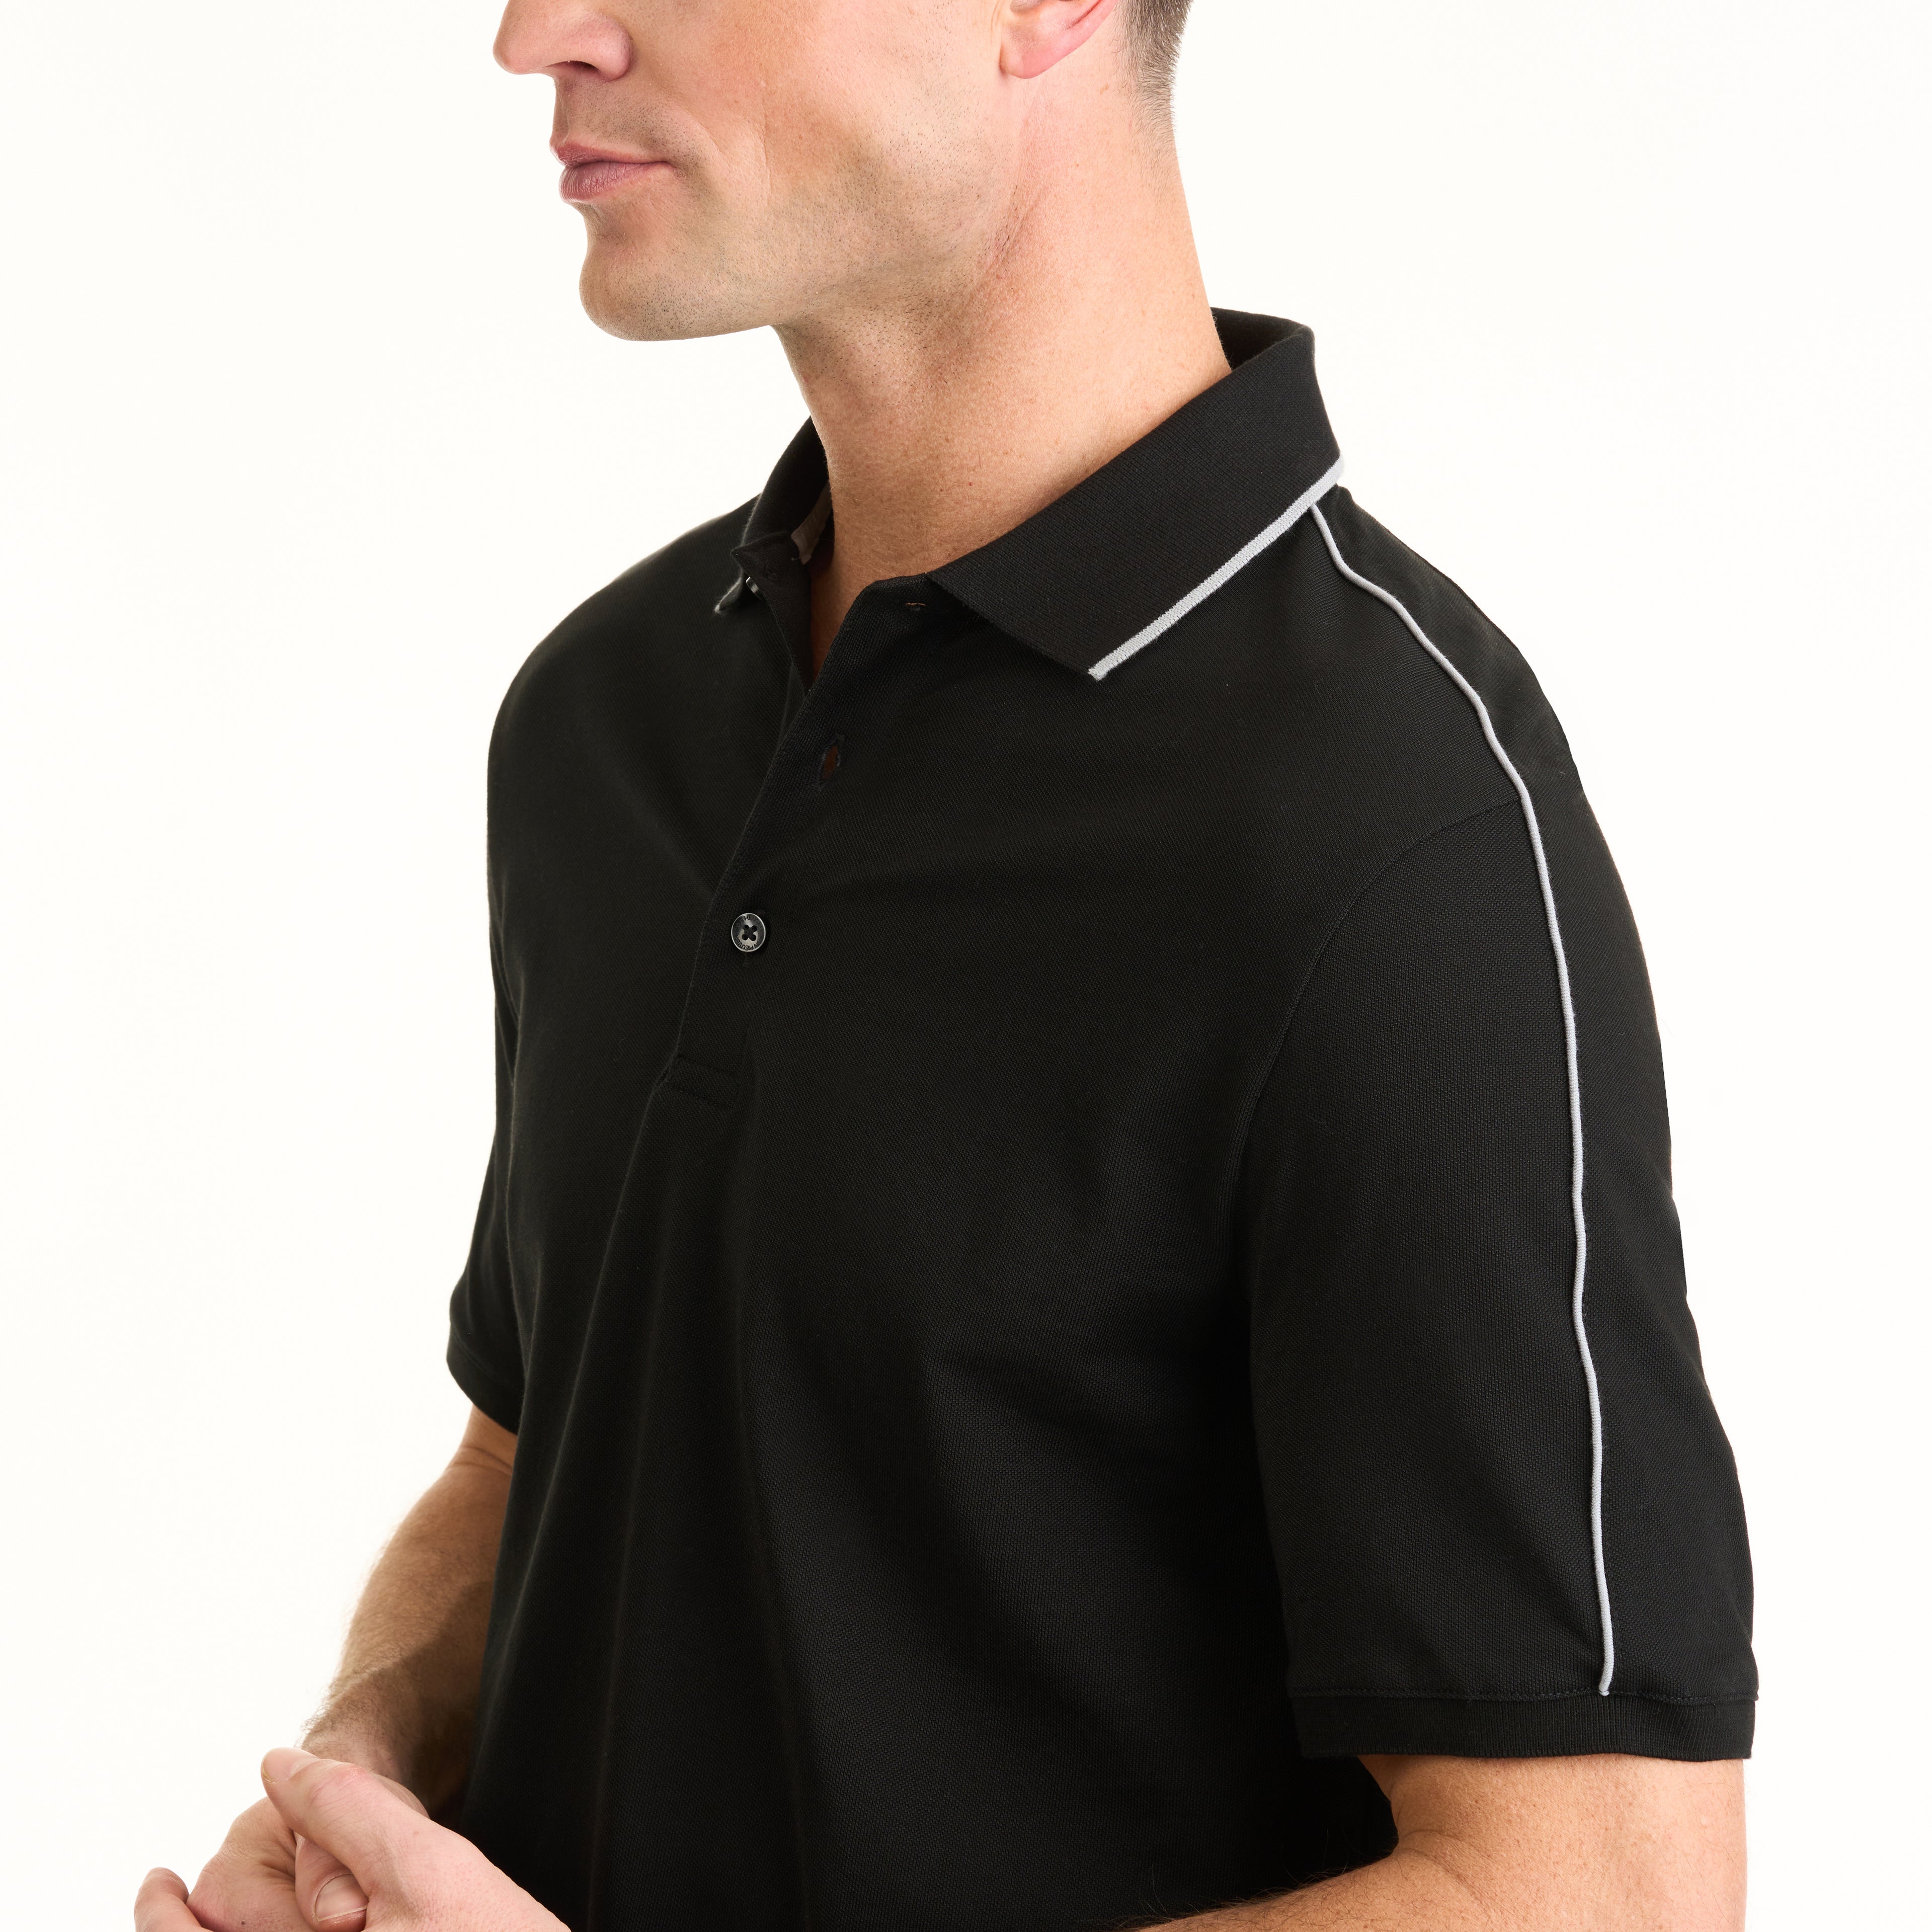 van heusen polo shirt men's L black 2 button brand new with tags 🔥